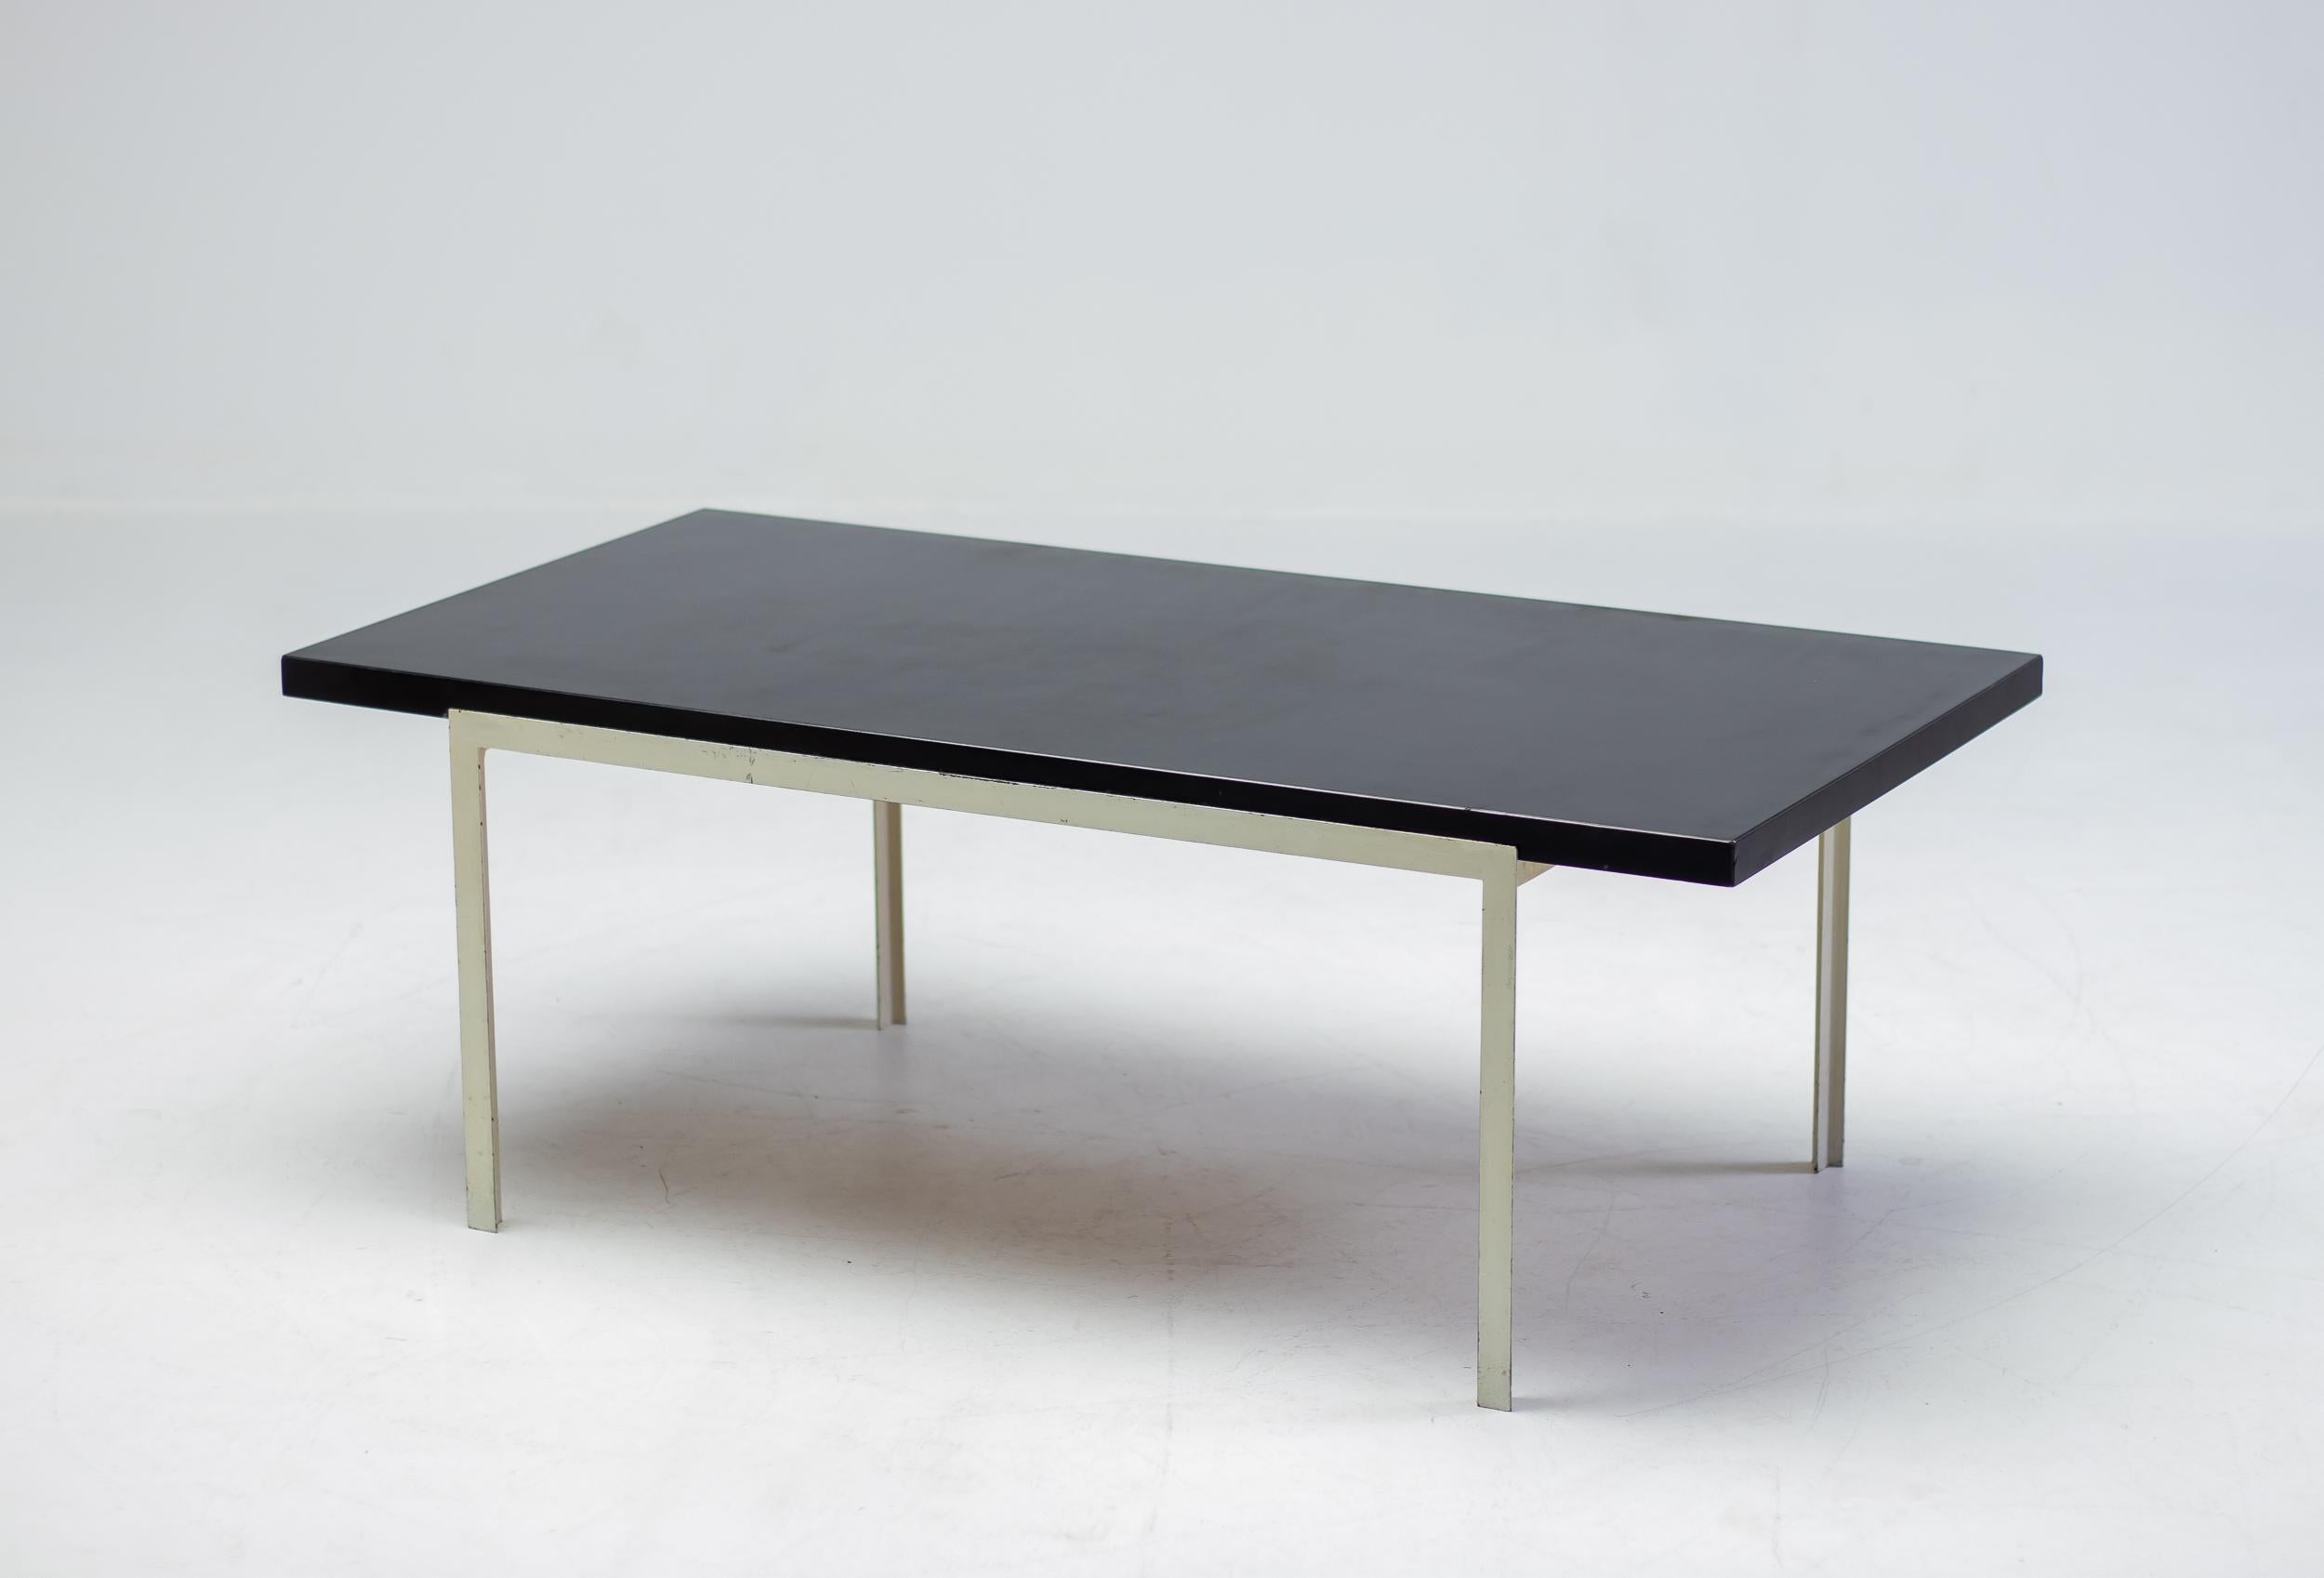 Florence Knoll for Knoll International coffee table in white enameled steel and black laminate.
Signed with decal manufacturer's label to underside.

Literature: Knoll Furniture: 1938-1960, Rouland and Rouland, pg. 110.

Florence Knoll, a pioneering